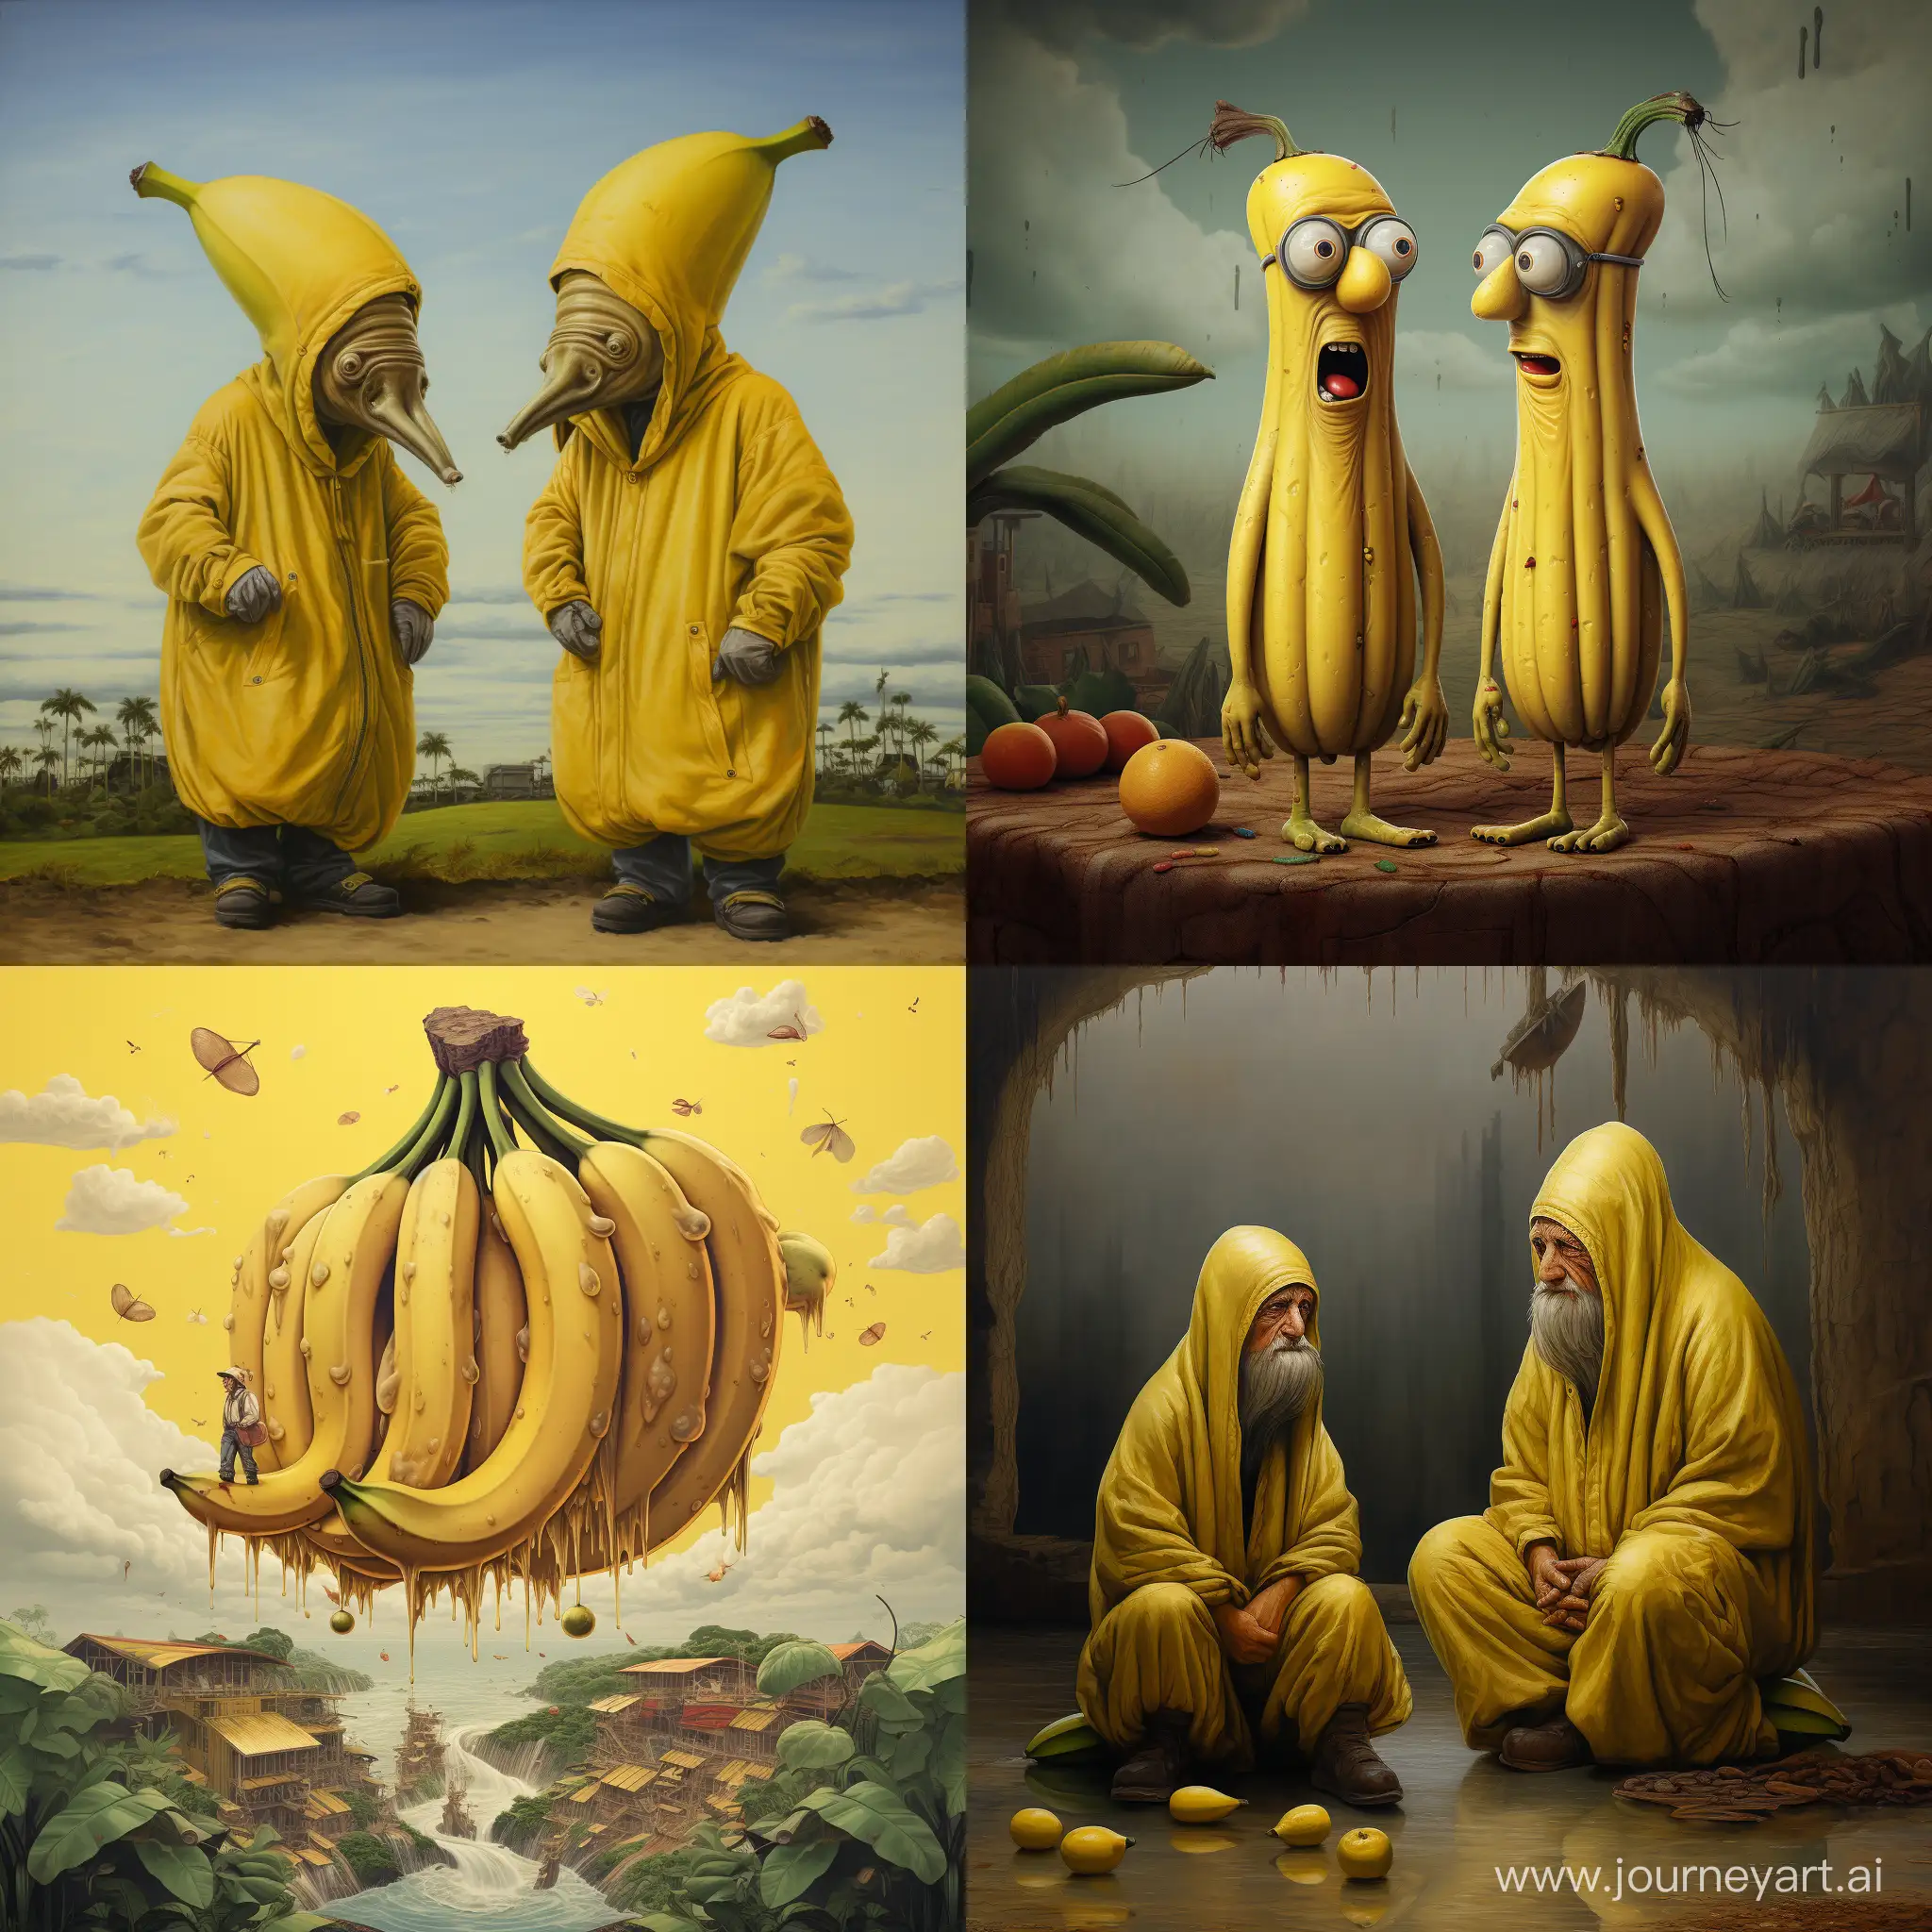 Philosophical-Debate-Between-Two-Bananas-on-the-Meaning-of-Life